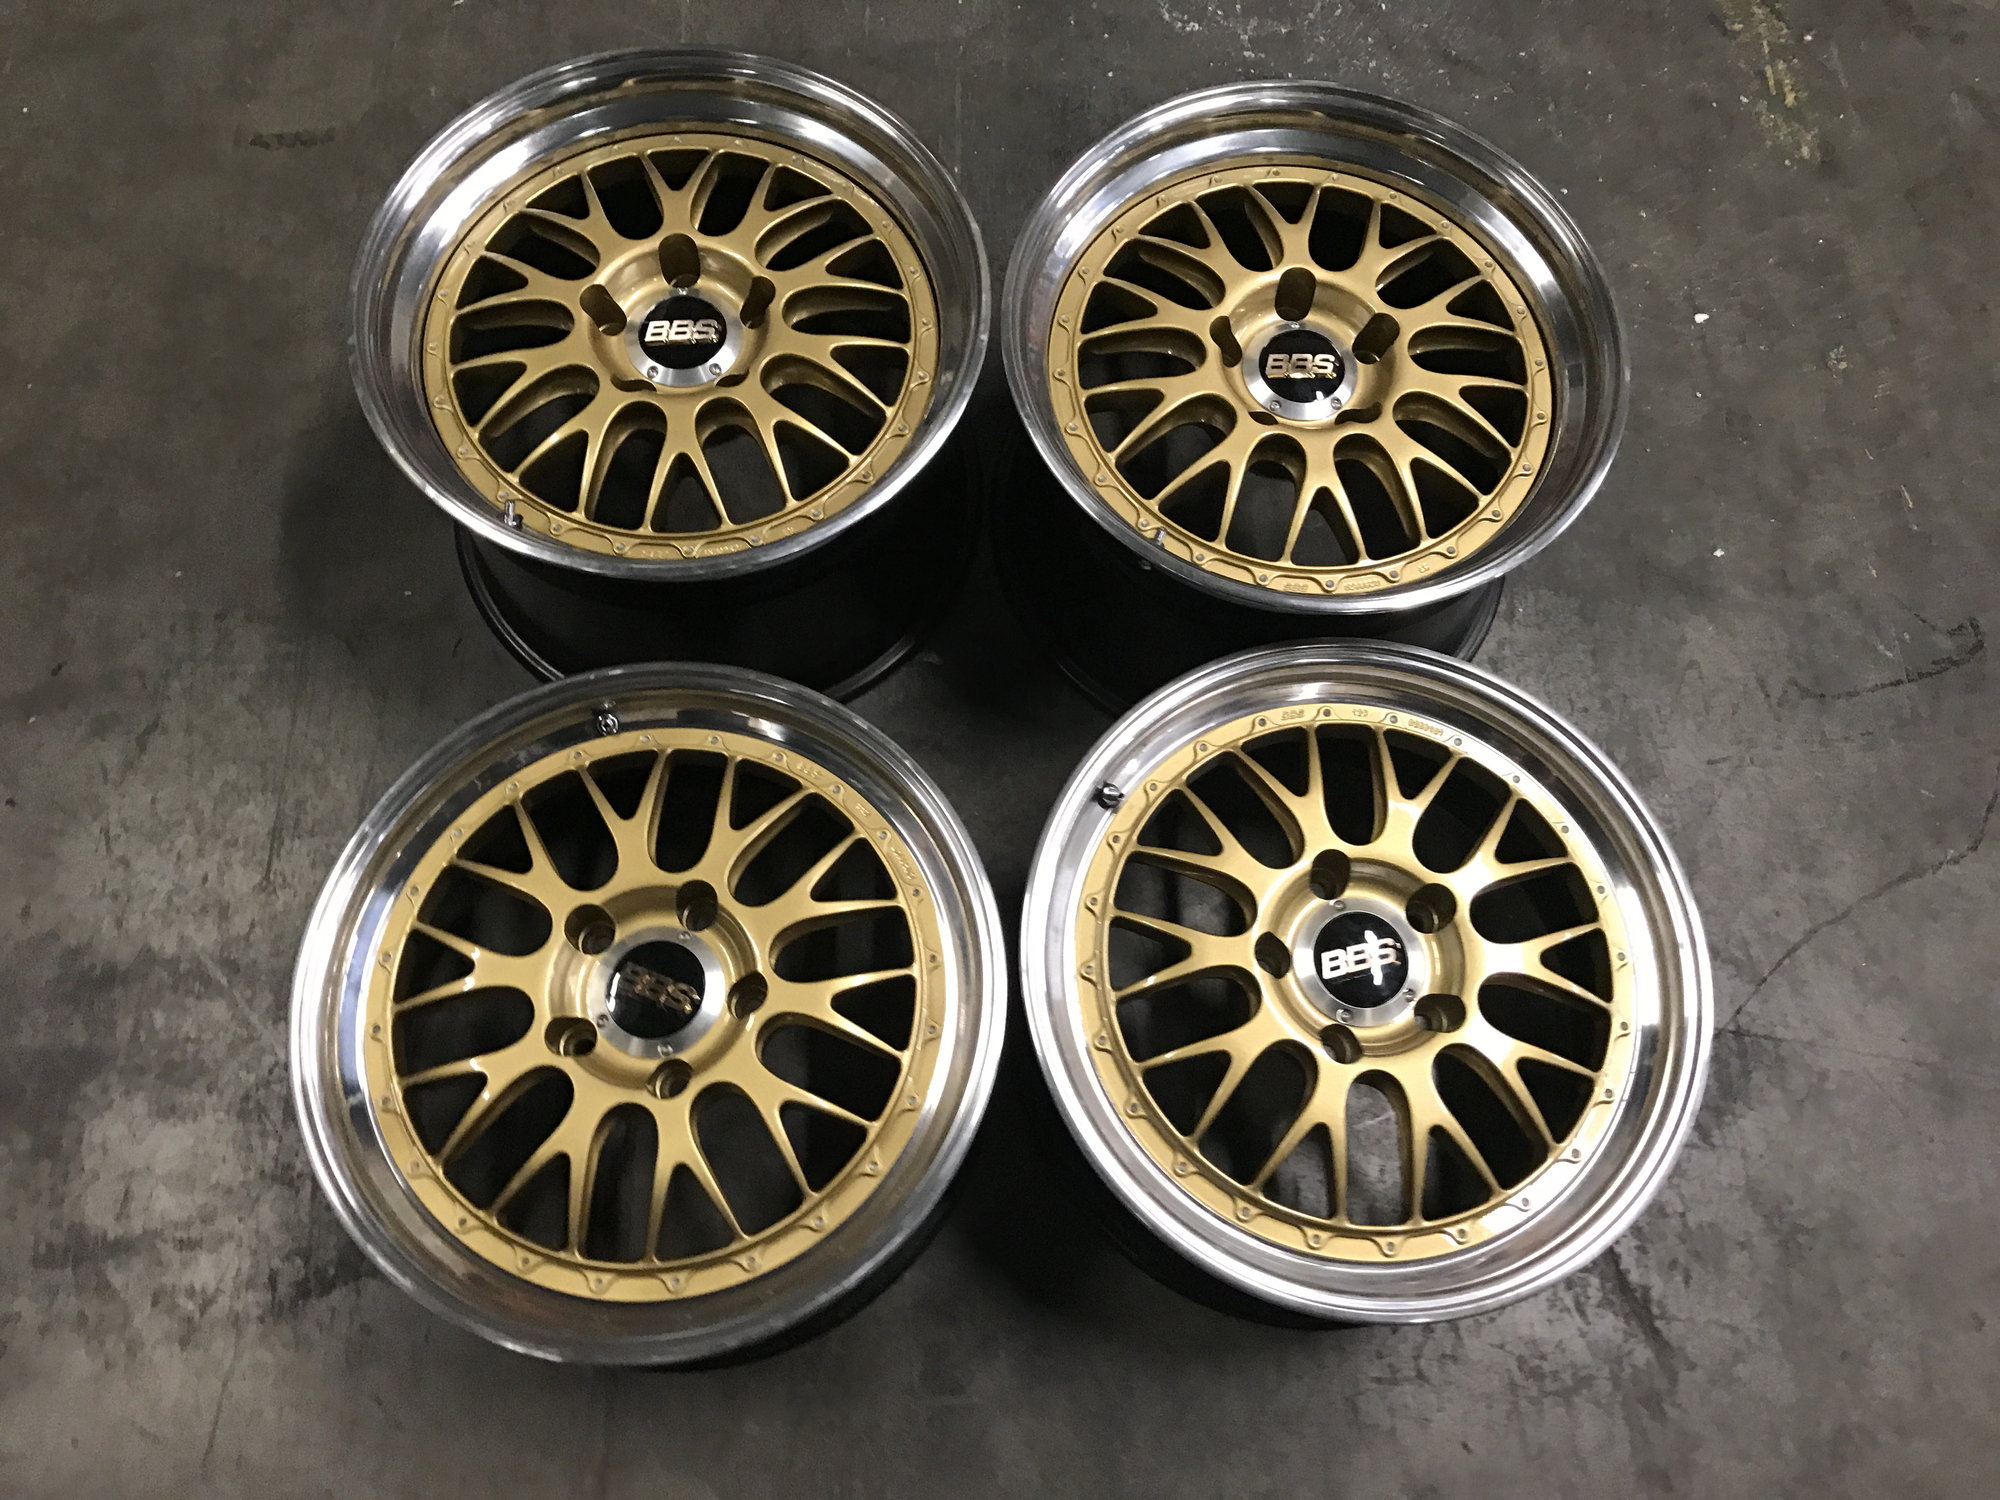 Wheels and Tires/Axles - Mint BBS E88 in Gold 993 & 996 Widebody fitment - New - Saylorsburg, PA 18353, United States